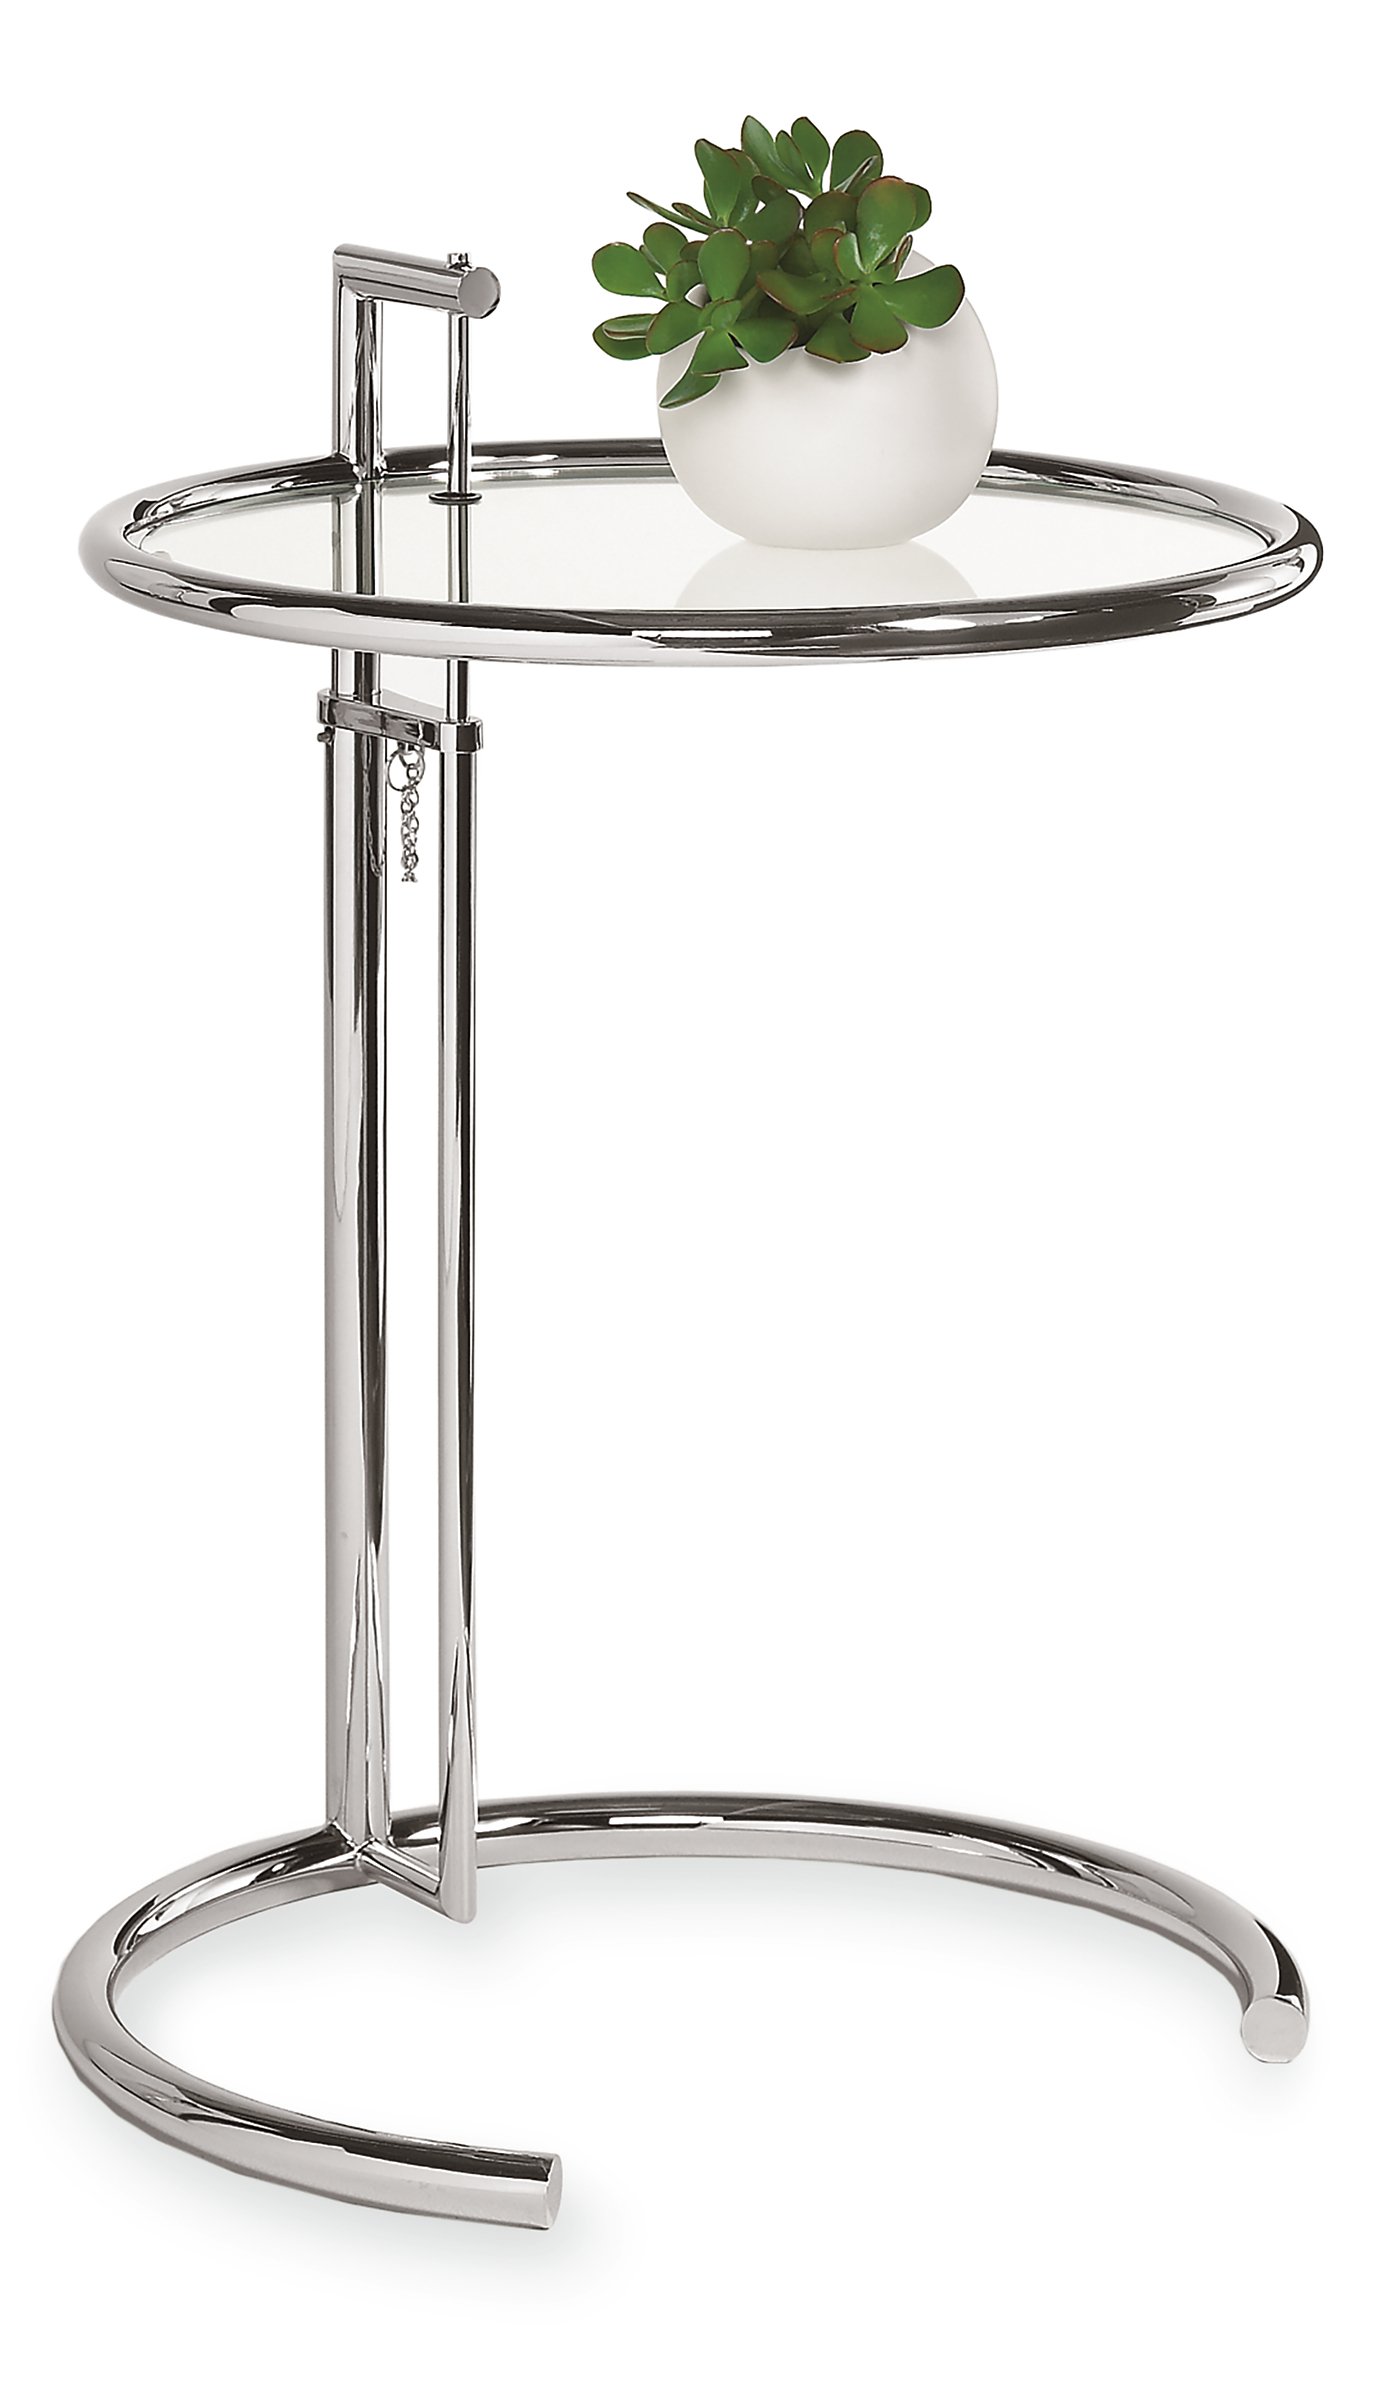 Eileen Gray 20 diam Round End Table in chrome and glass with plant.